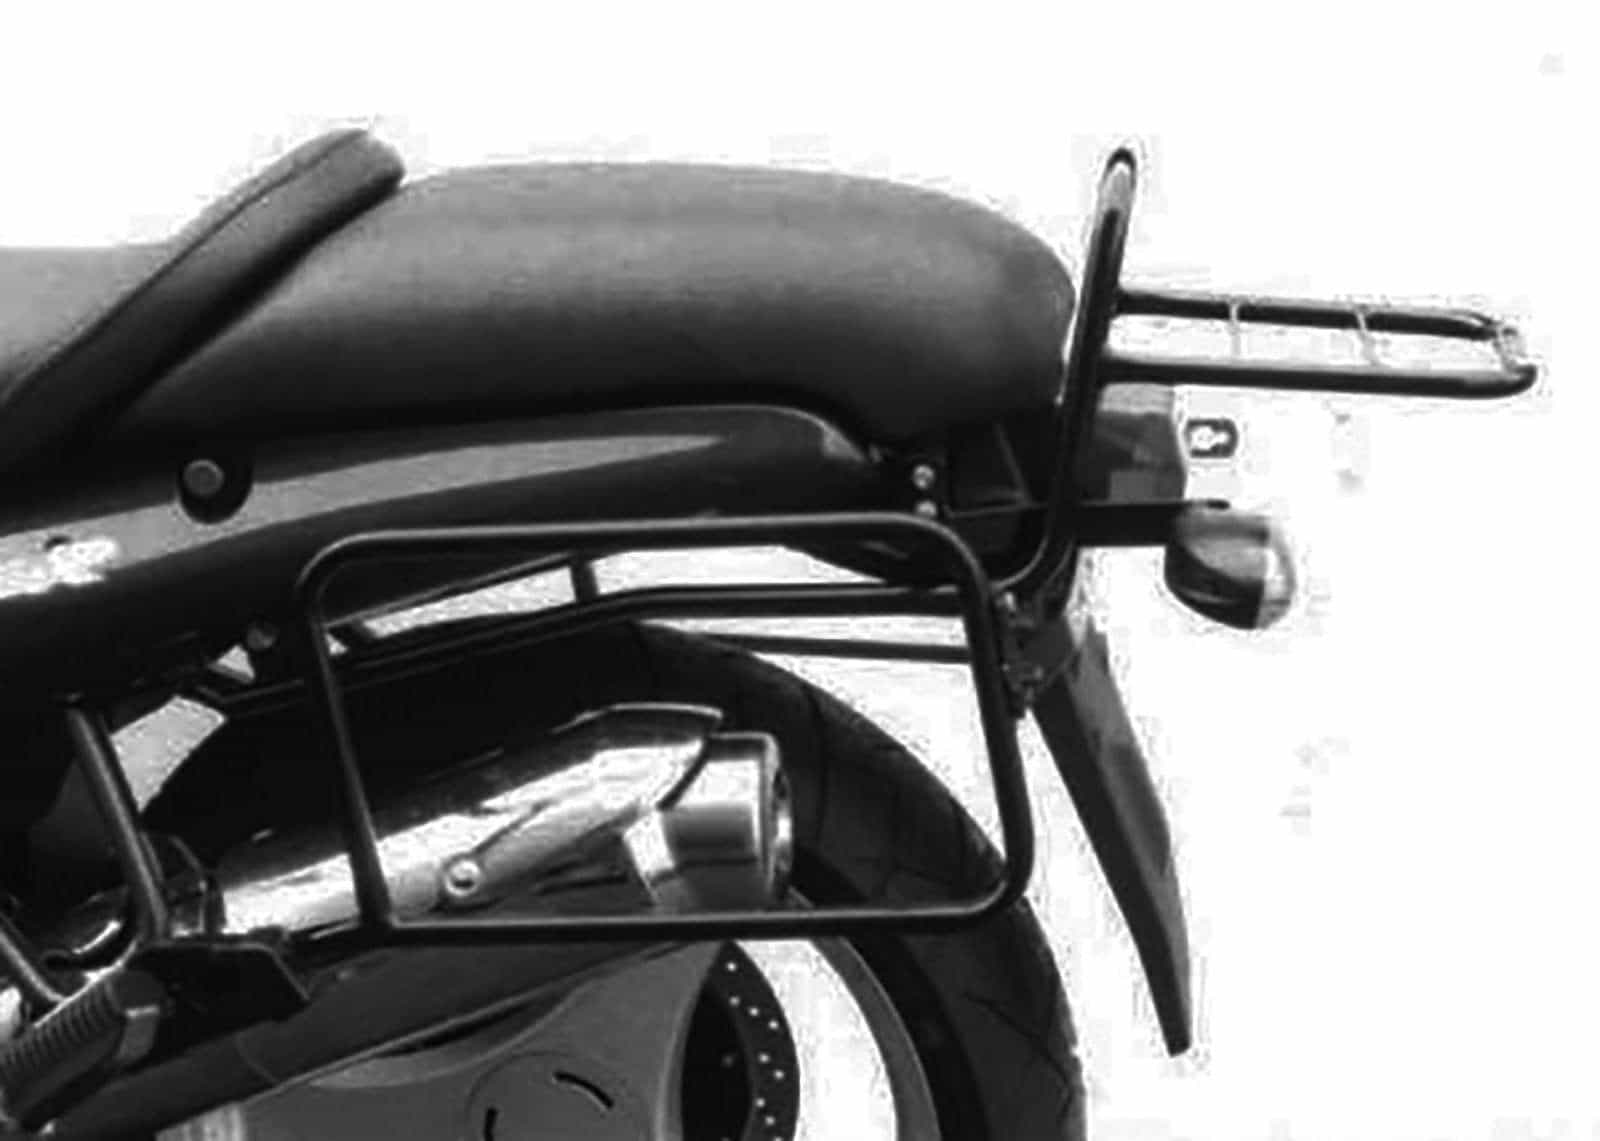 Sidecarrier permanent mounted black for BMW R 850 R (1994-2002)/R 1100 R (1994-1999)